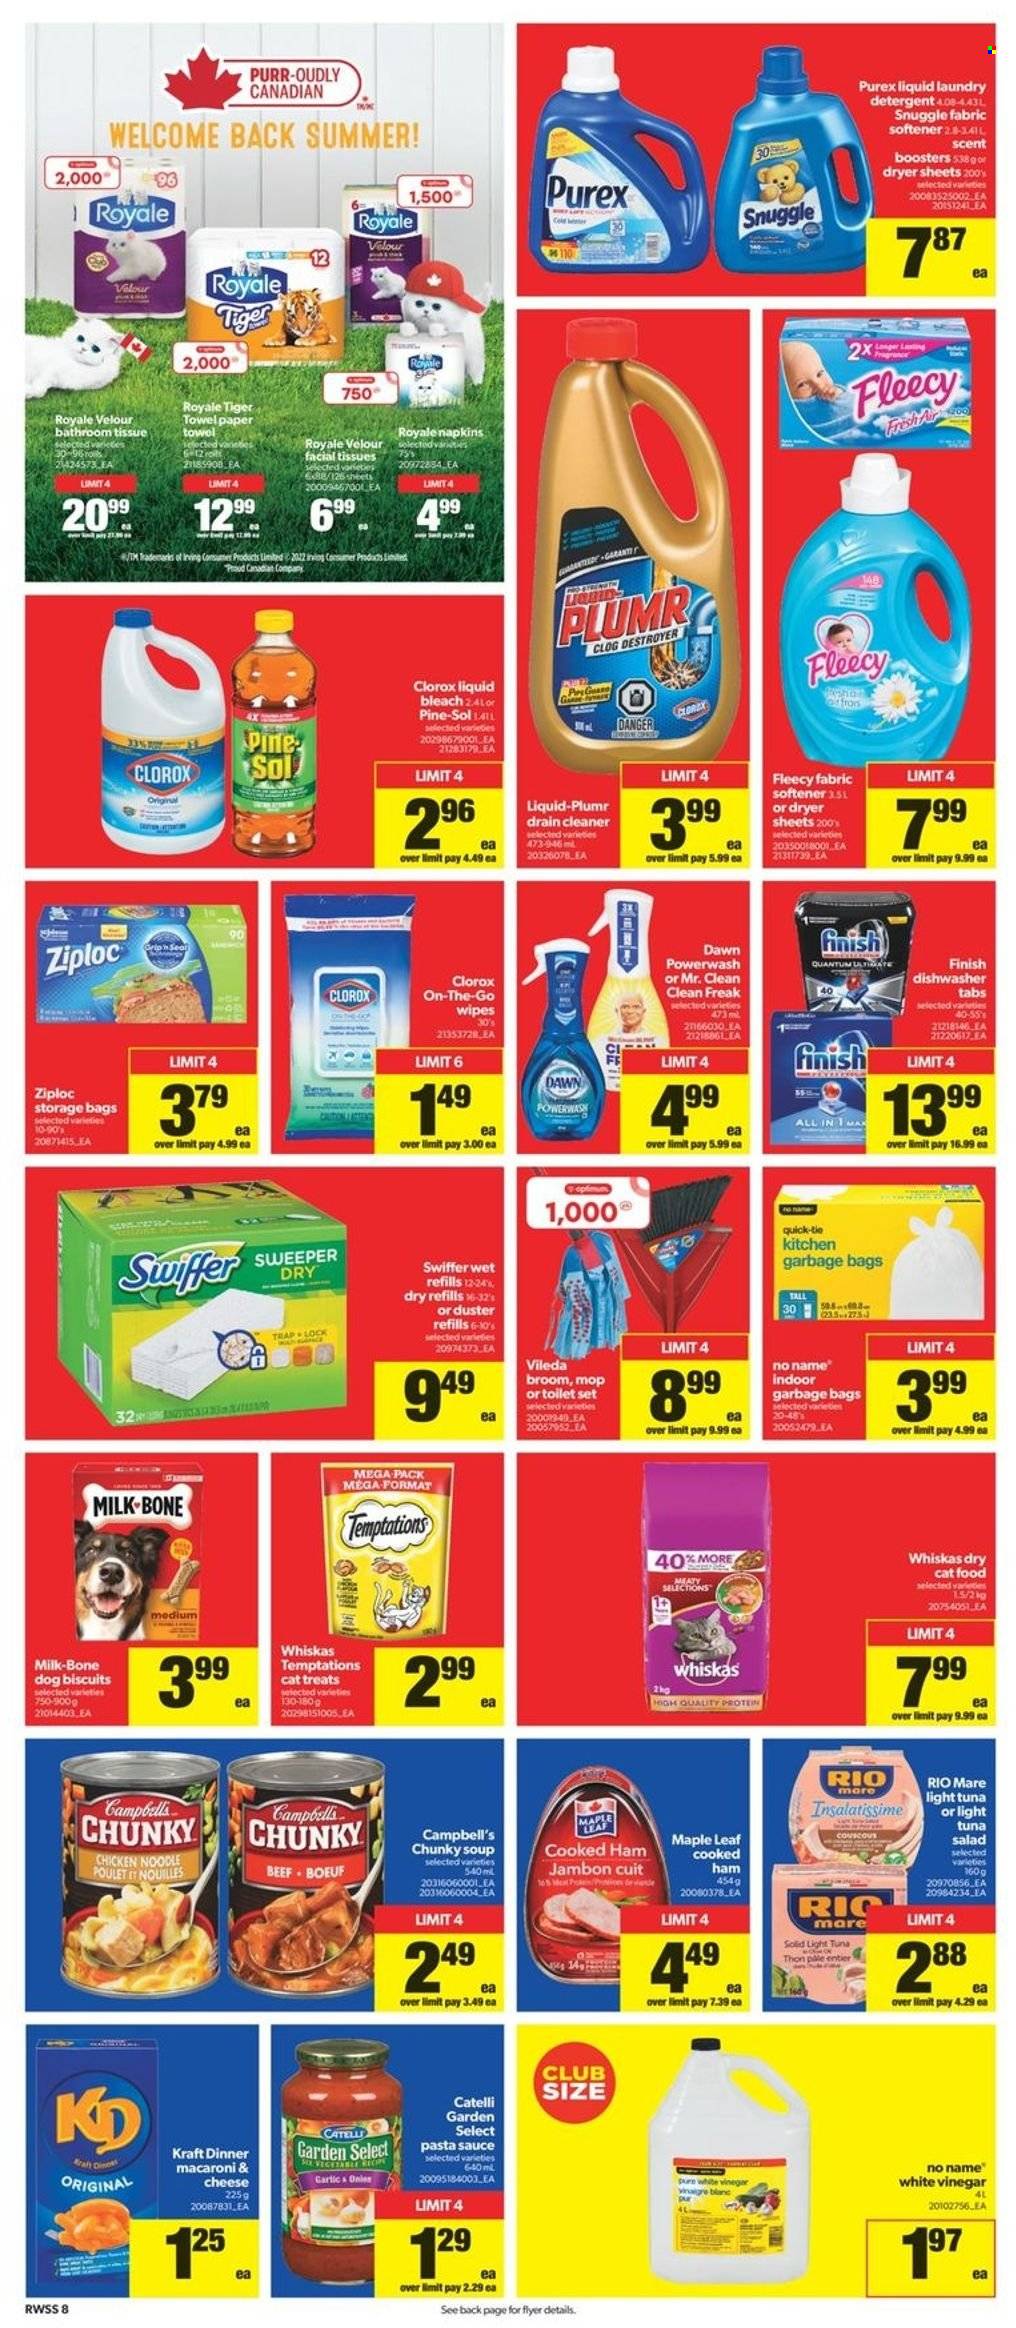 thumbnail - Real Canadian Superstore Flyer - June 30, 2022 - July 06, 2022 - Sales products - No Name, Campbell's, macaroni & cheese, pasta sauce, soup, noodles, Kraft®, cooked ham, ham, tuna salad, milk, light tuna, vinegar, wipes, napkins, bath tissue, paper towels, cleaner, bleach, Clorox, Pine-Sol, Swiffer, Snuggle, fabric softener, laundry detergent, dryer sheets, Purex, facial tissues, bag, Ziploc, storage bag, Vileda, mop, duster, broom, animal food, animal treats, cat food, dog food, dog biscuits, Optimum, dry cat food, detergent, Whiskas. Page 9.